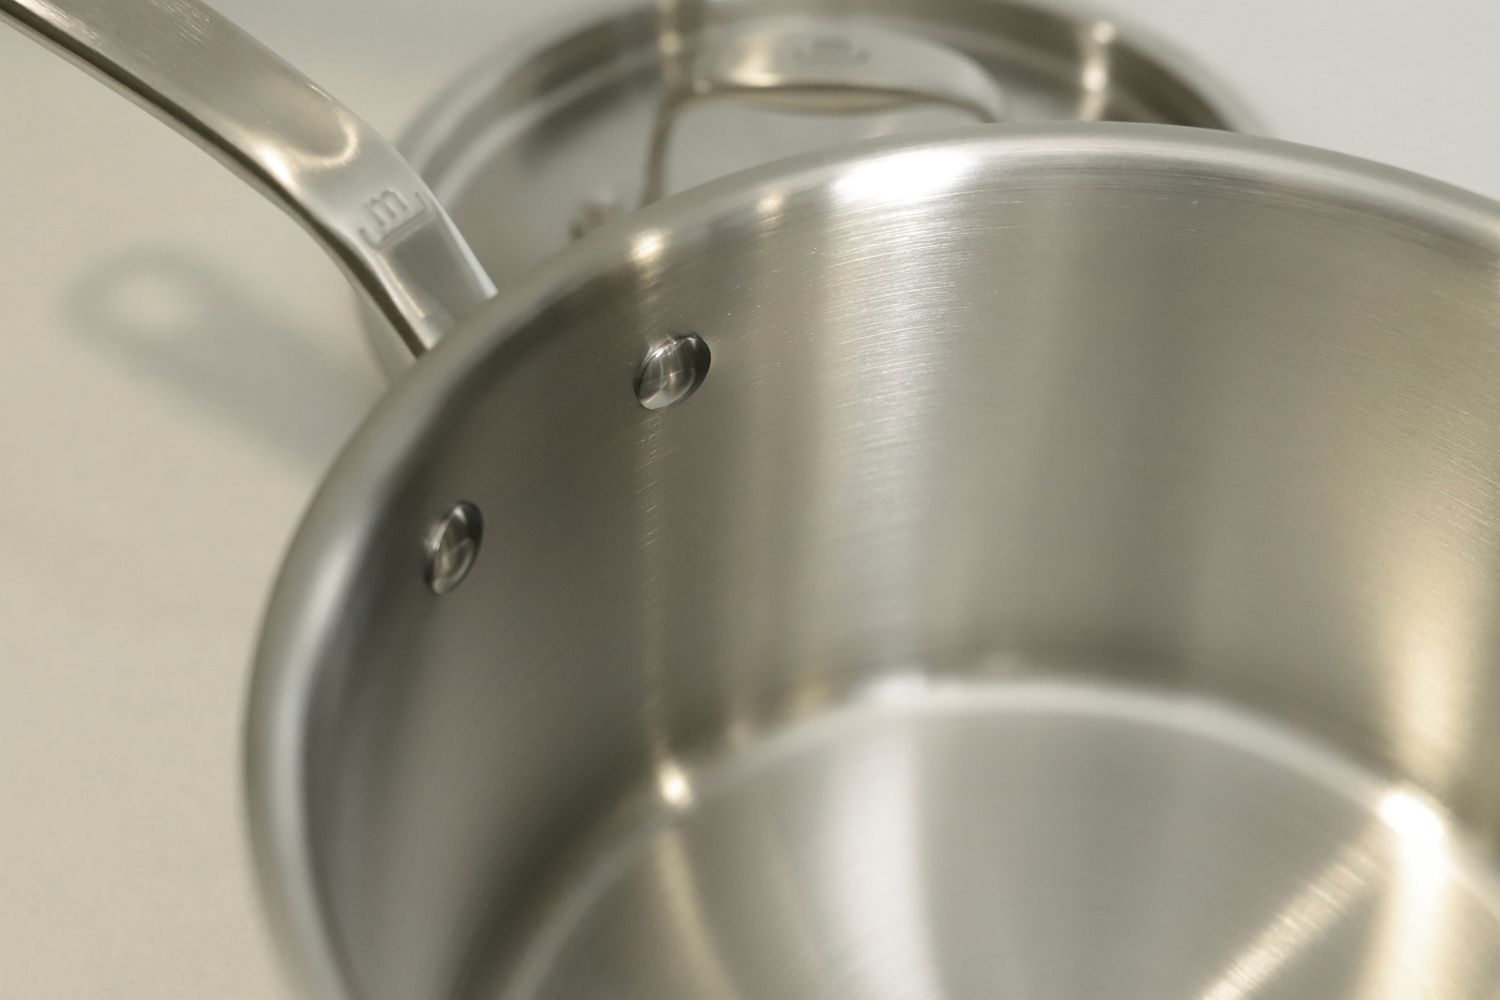 Close up of the handle rivets on the Made In small saucepan